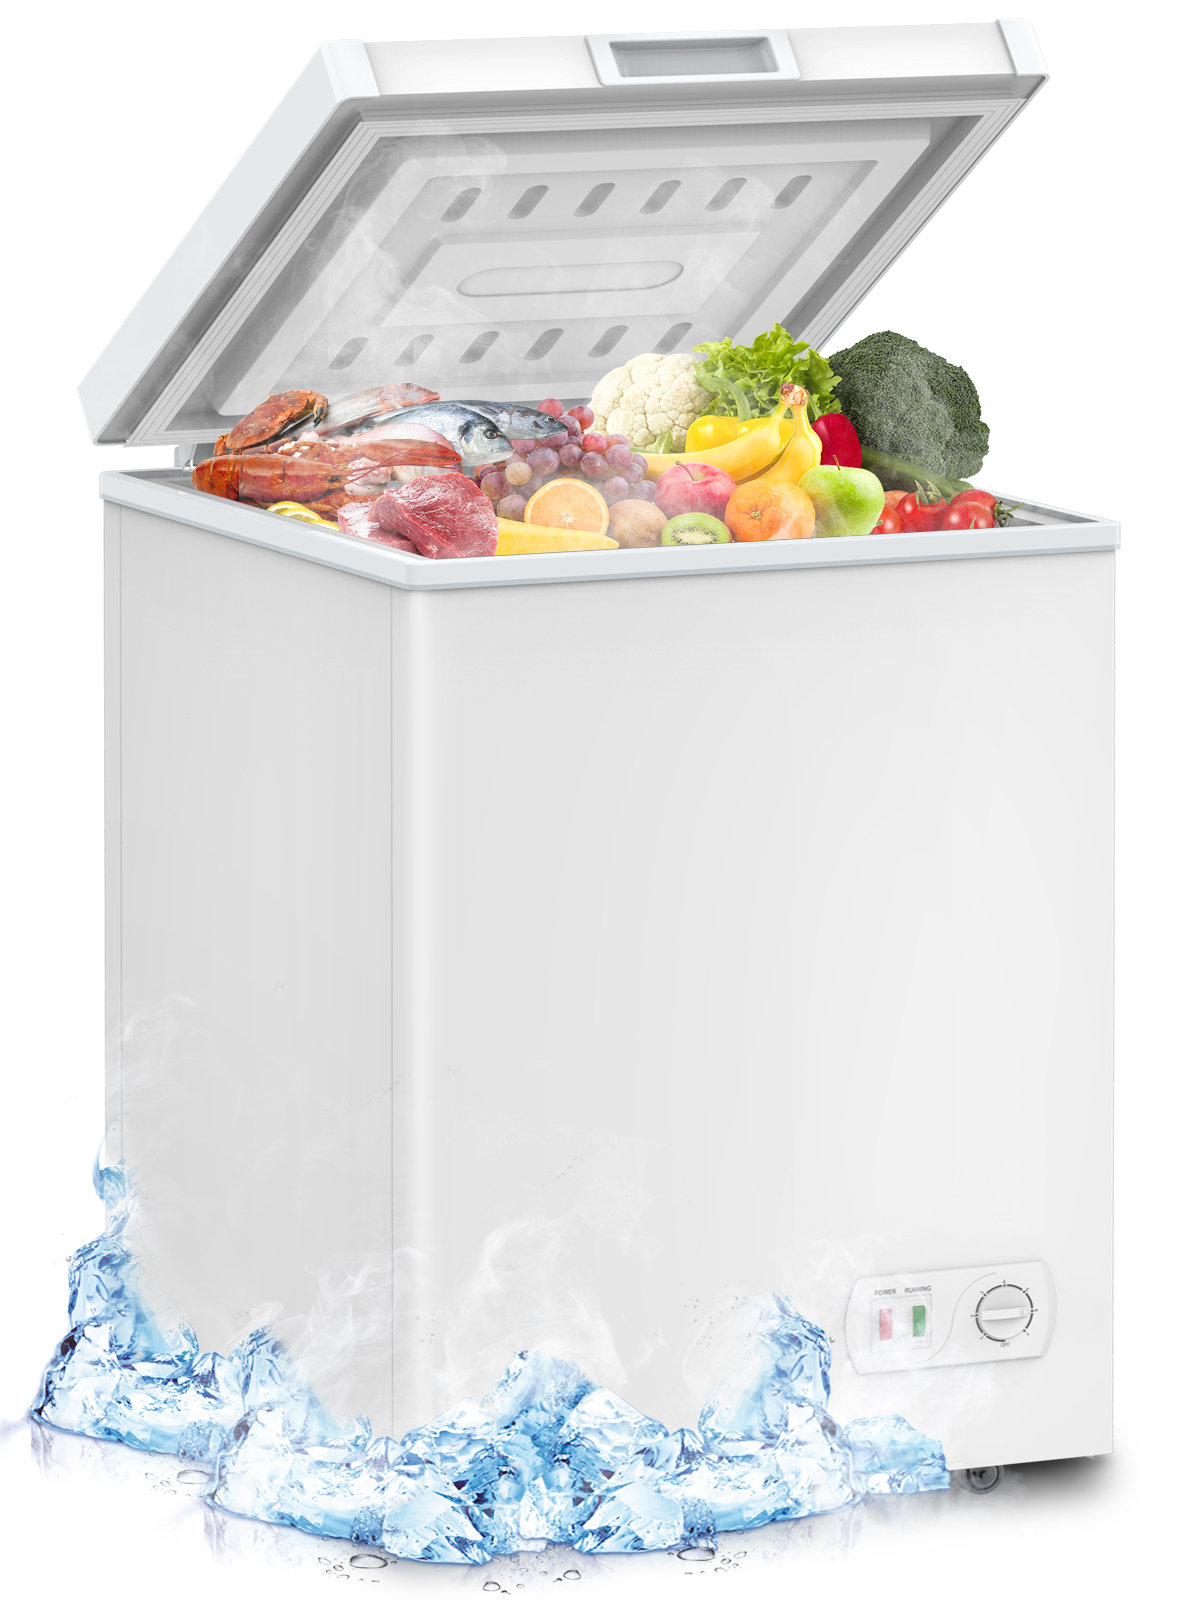 oylus Portable 3.5 Cubic Feet Chest Freezer with Adjustable Temperature  Controls